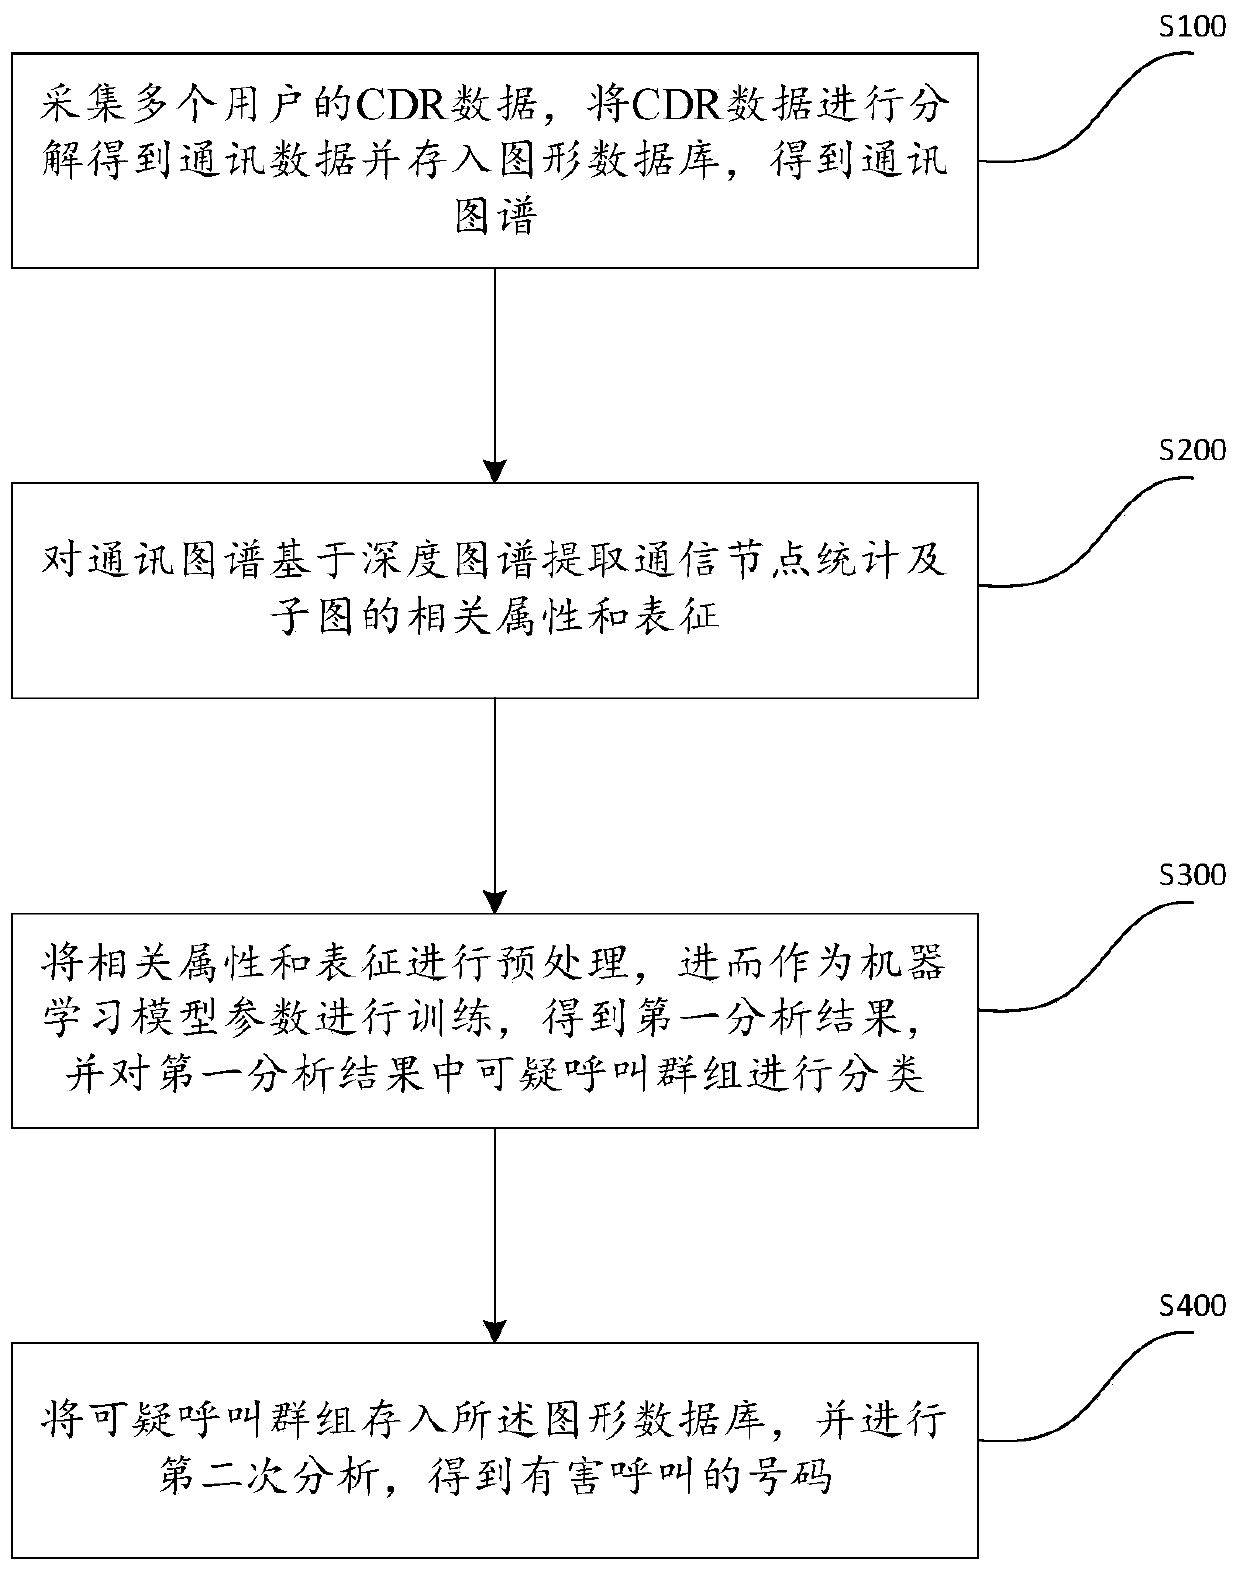 Personal harmful call detection method and device based on streaming data graph and readable medium